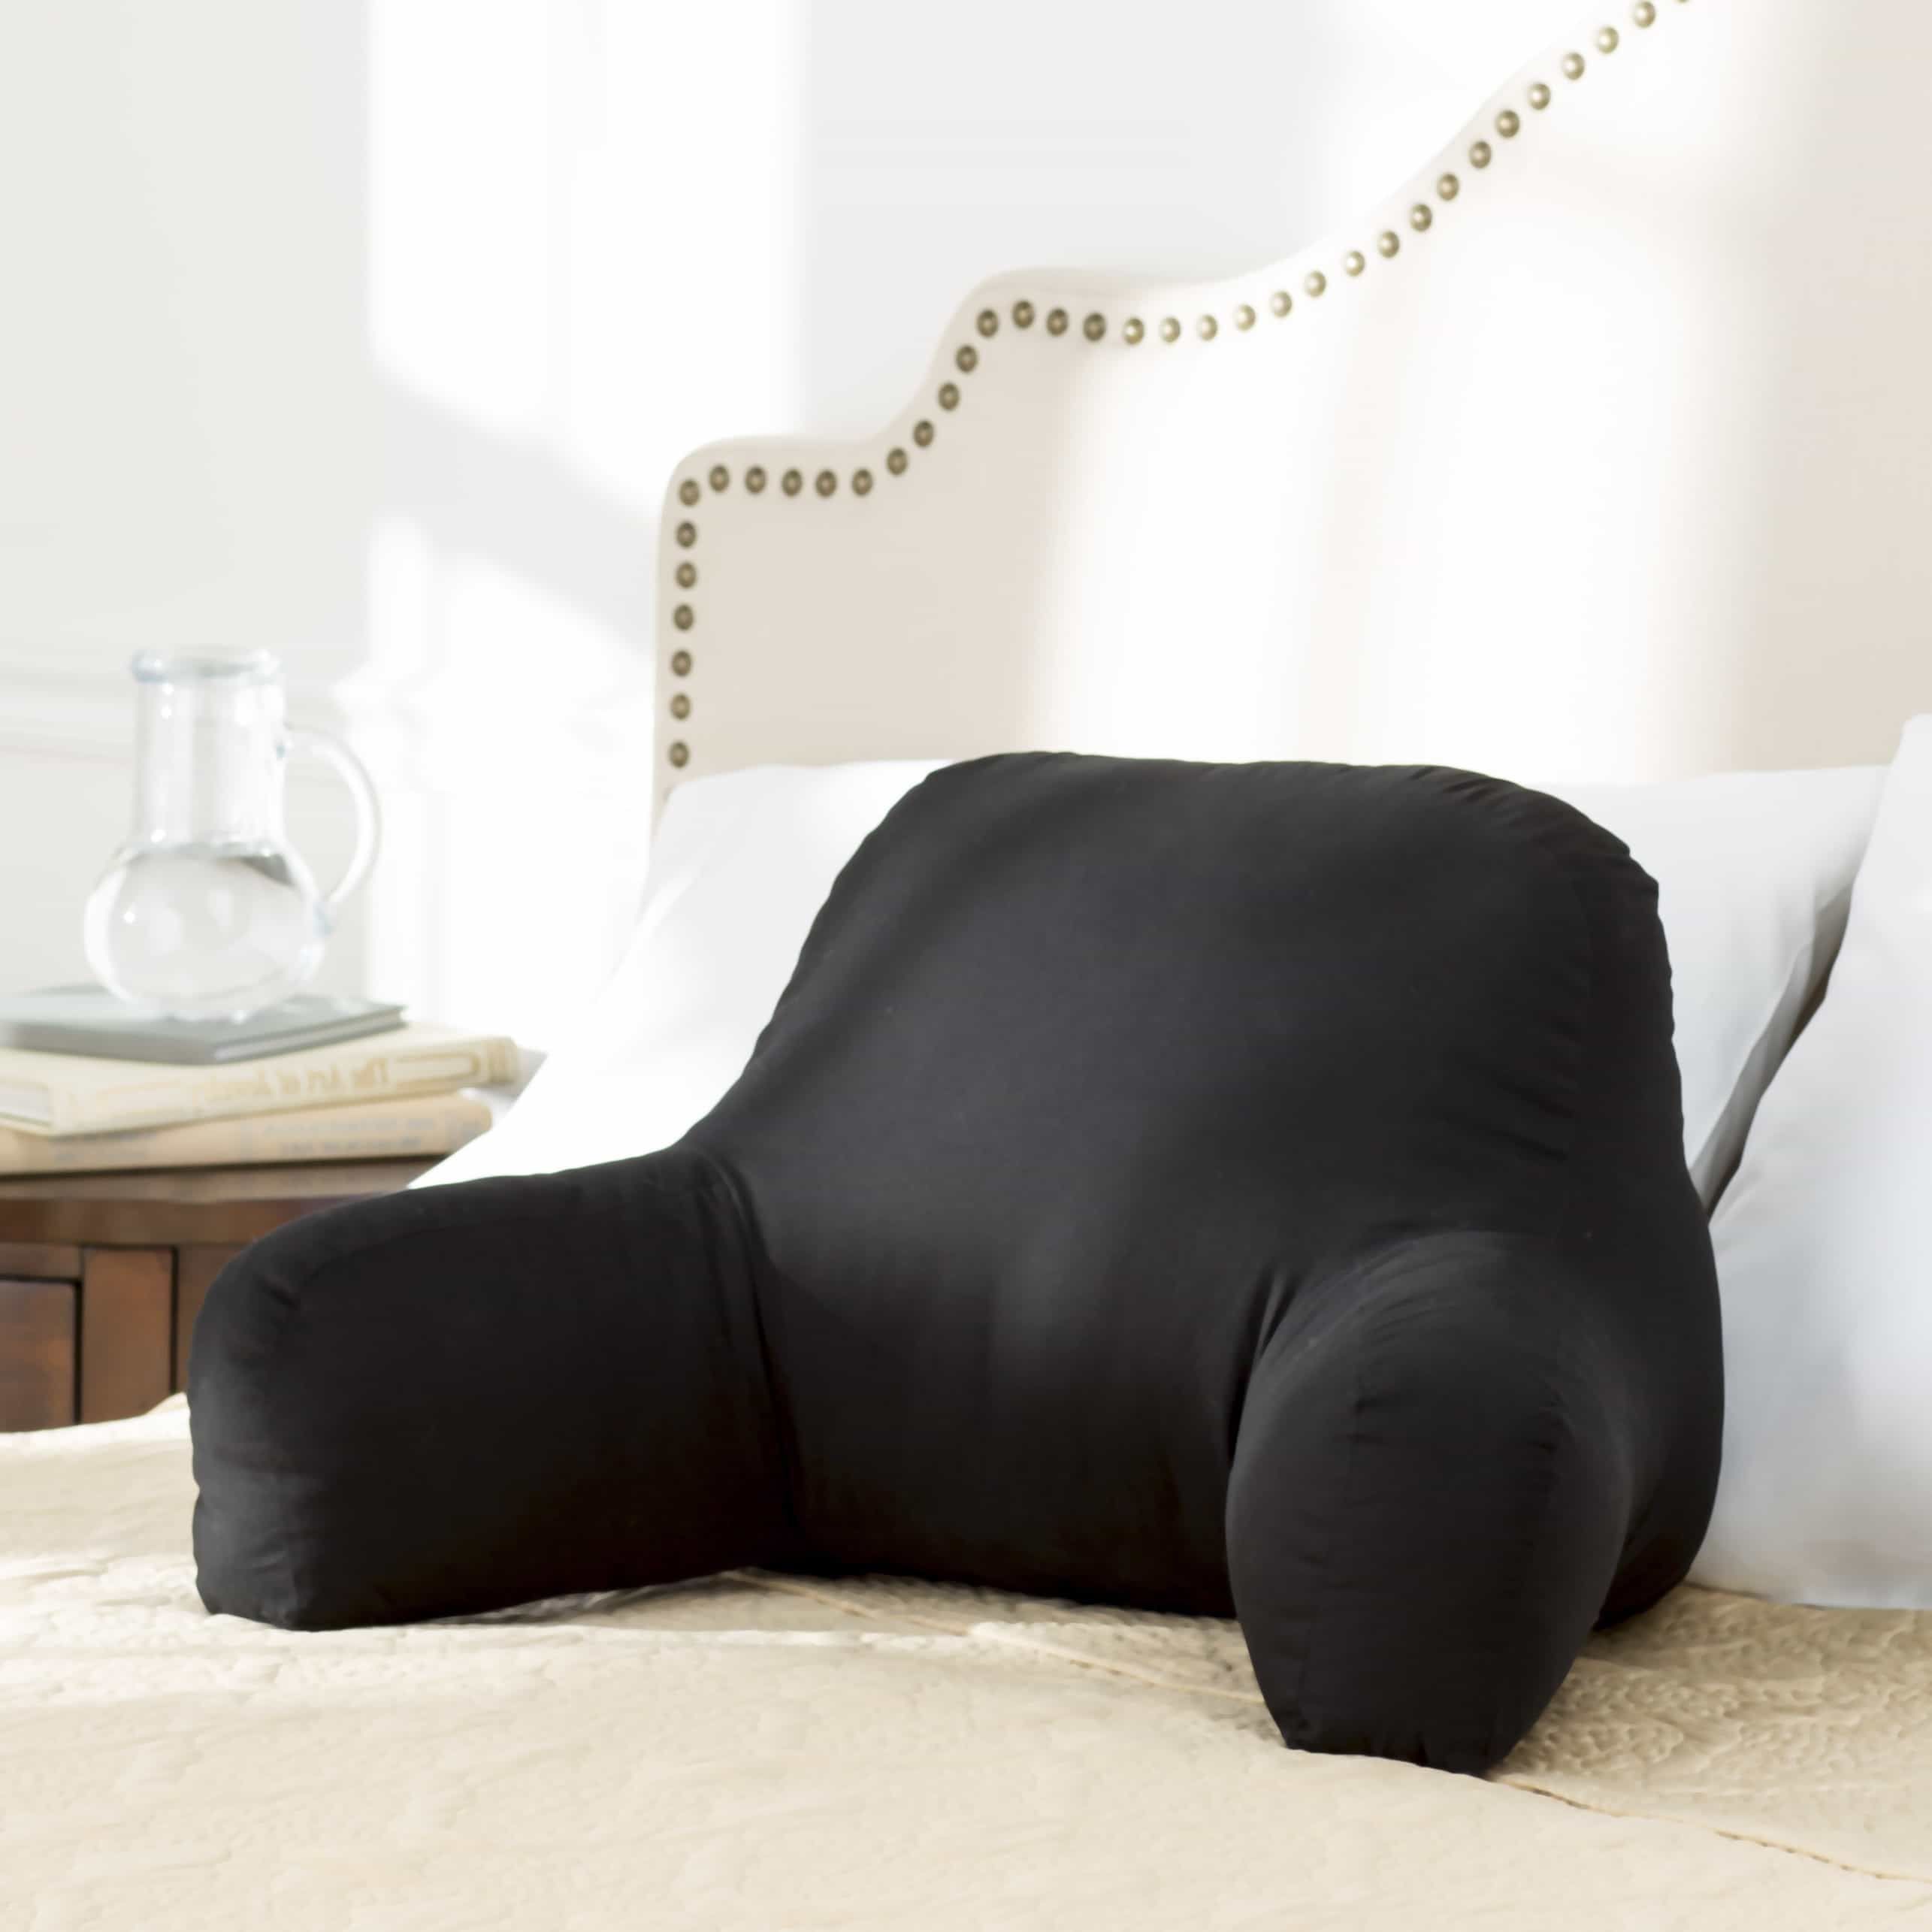 Modern Backrest Pillows With Arm Support (View 2 of 2)